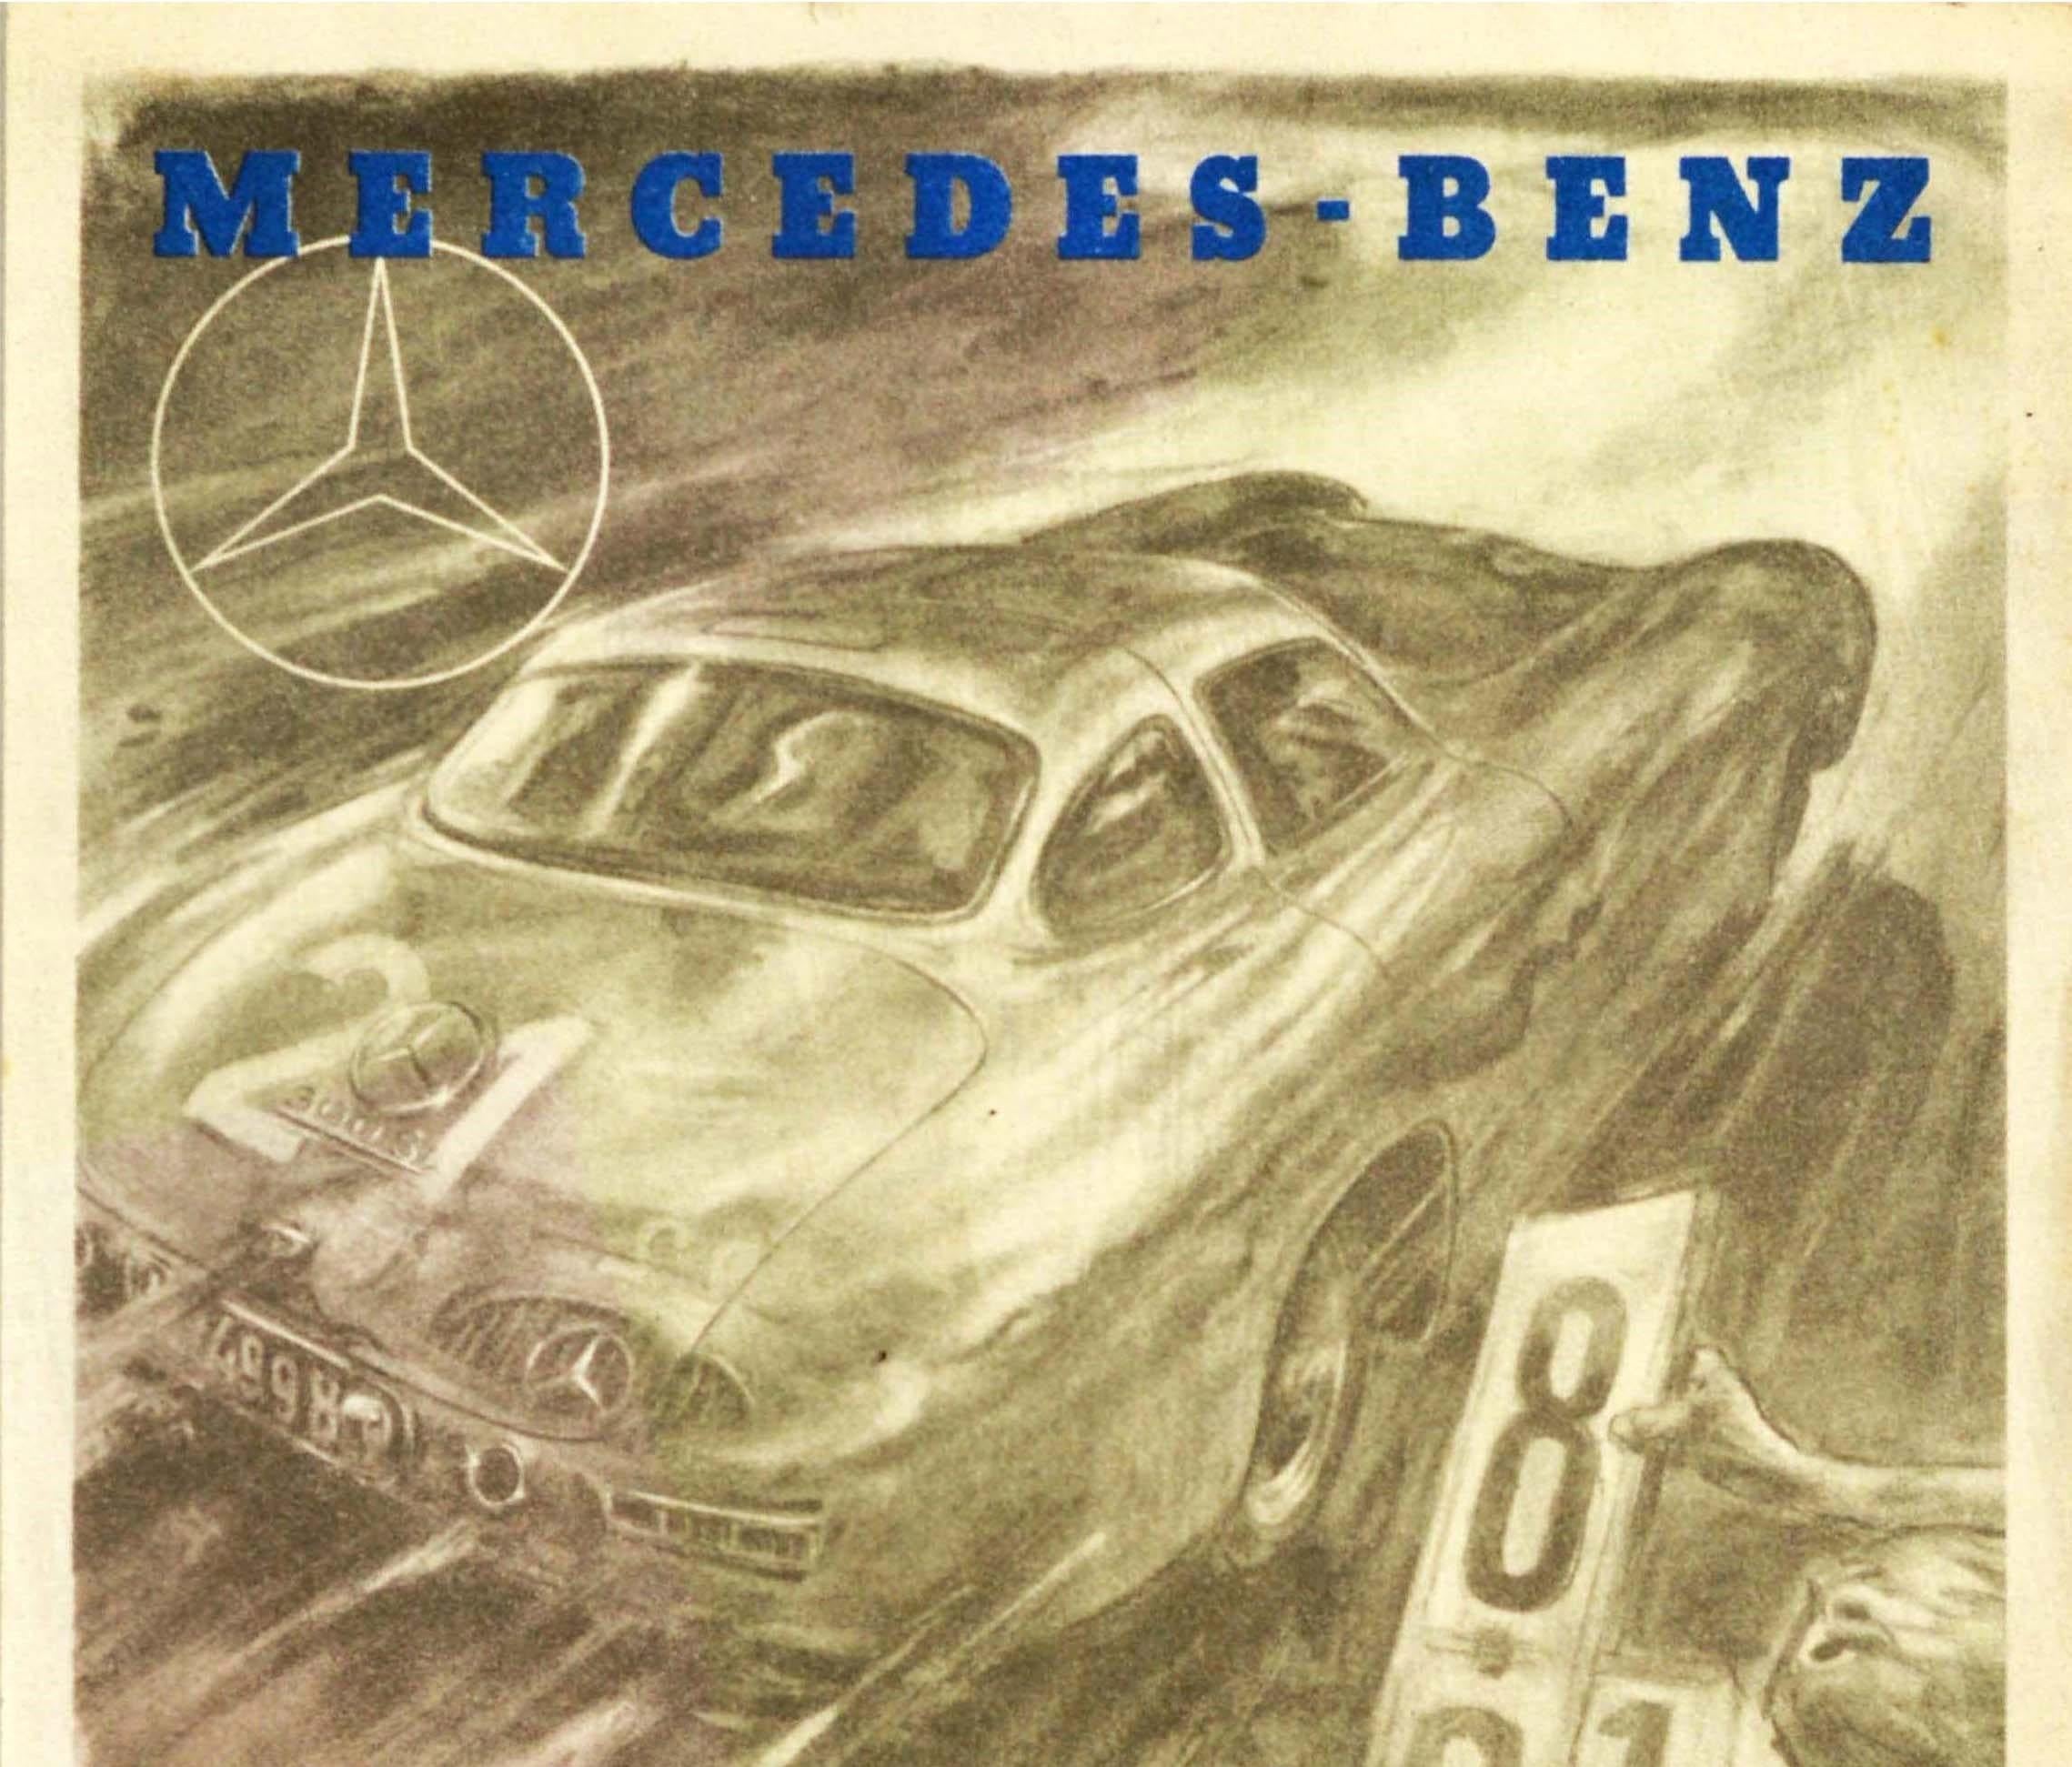 Original vintage motorsport poster celebrating the double victory of Mercedes-Benz 300SL in the 24 hour Le Mans car race featuring a dynamic illustration by the Austrian graphic designer, painter and artist Hans Liska (1907-1983) depicting a race